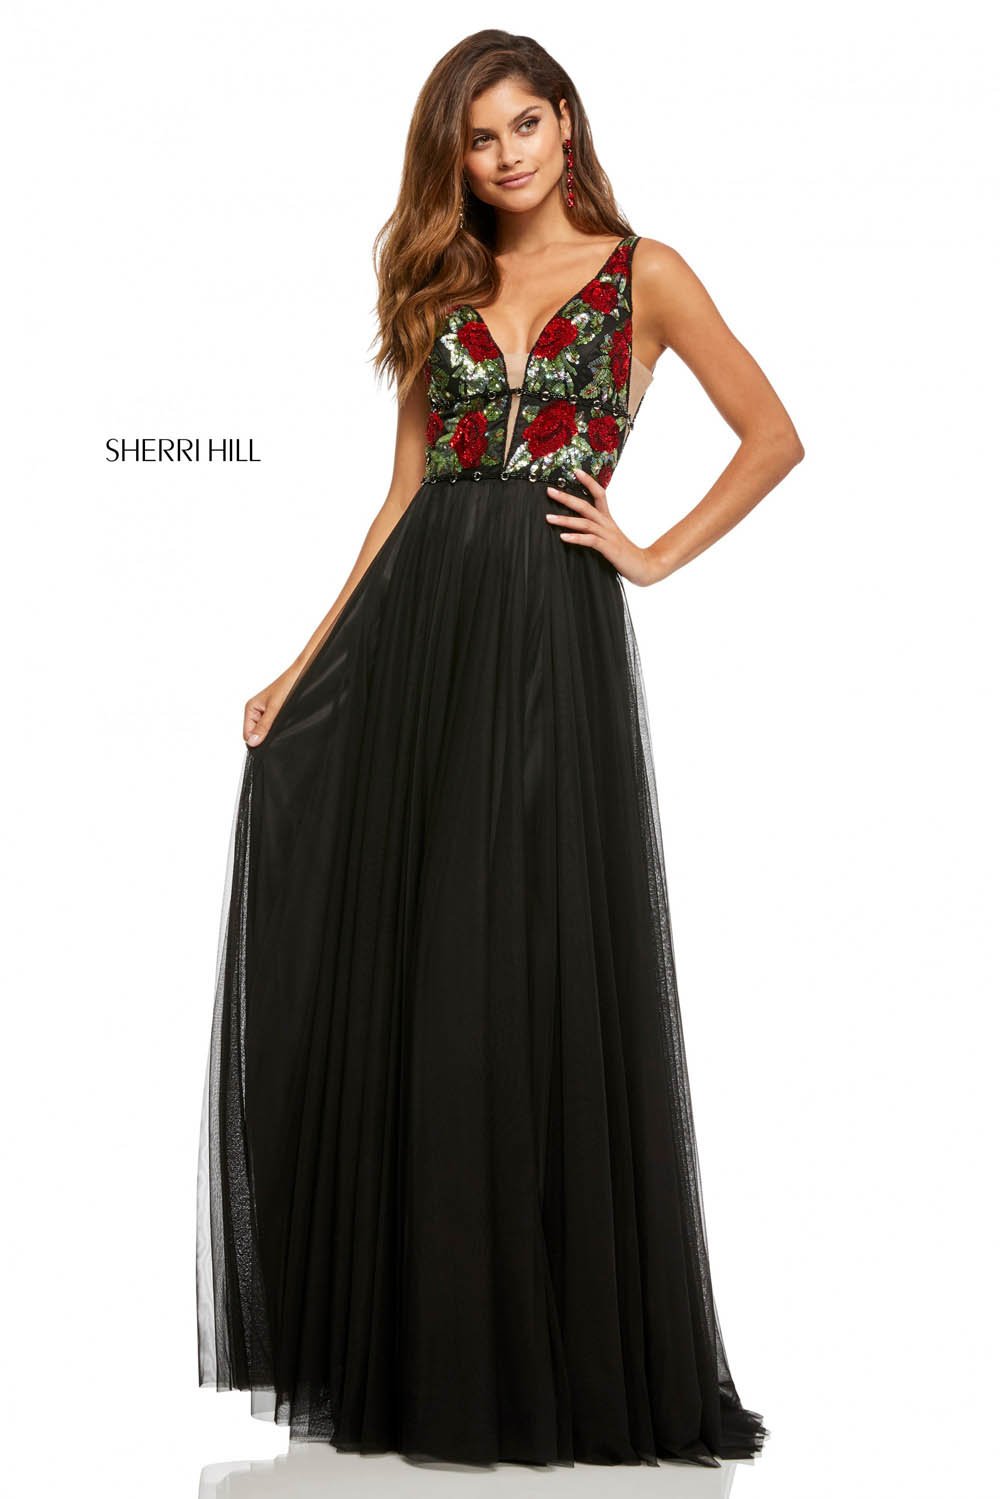 Sherri Hill 52714 dress images in these colors: Black Red.